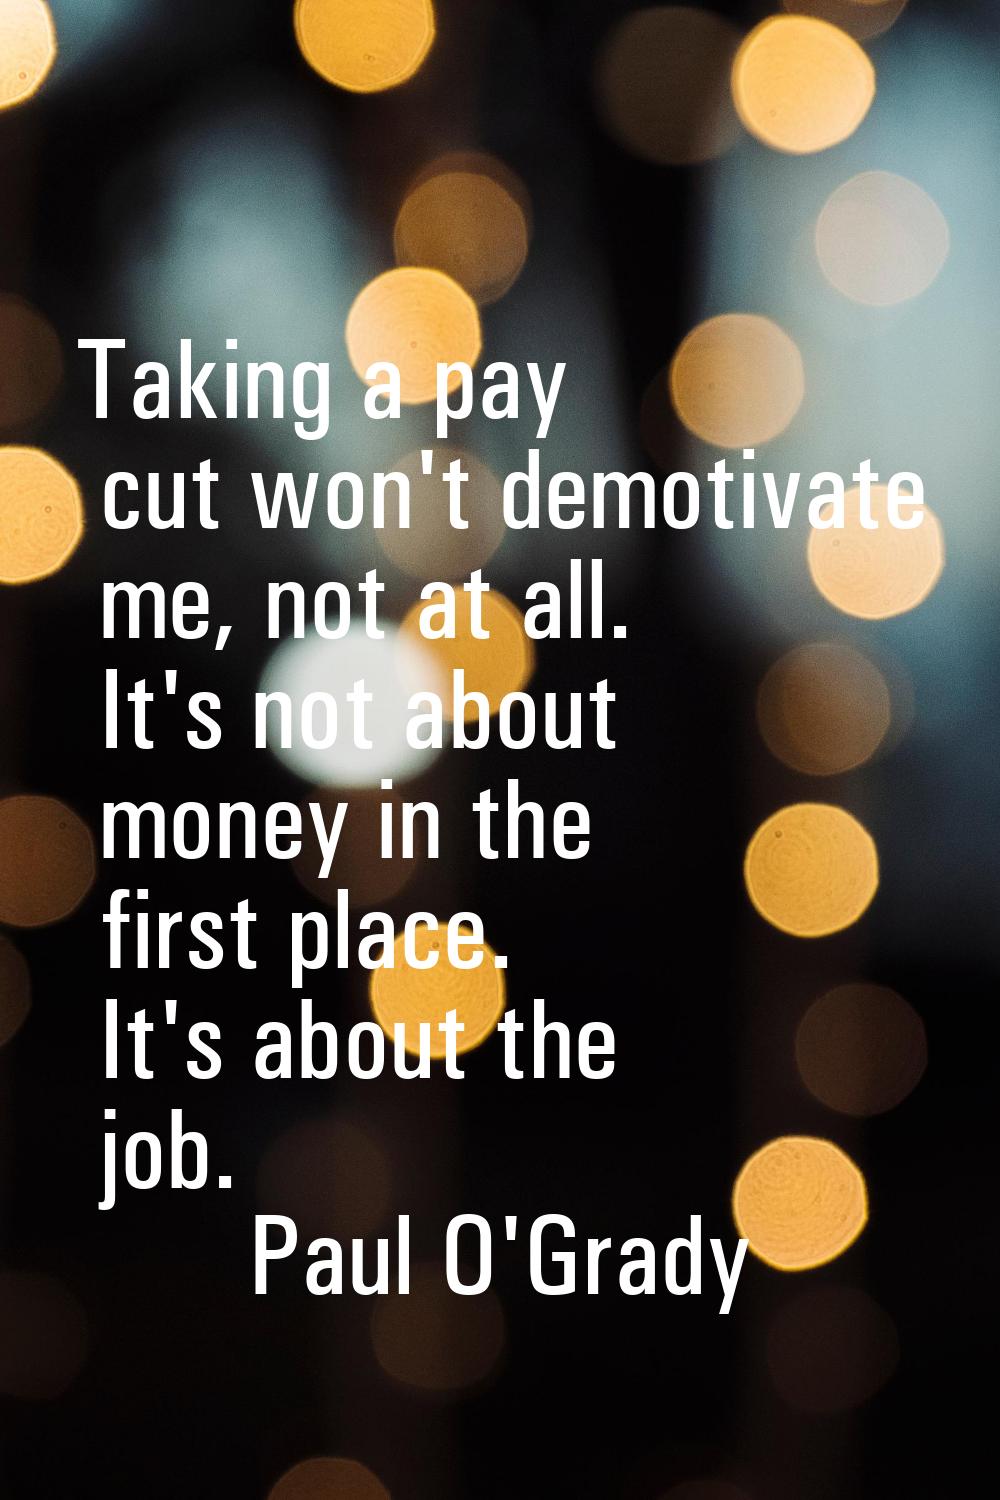 Taking a pay cut won't demotivate me, not at all. It's not about money in the first place. It's abo